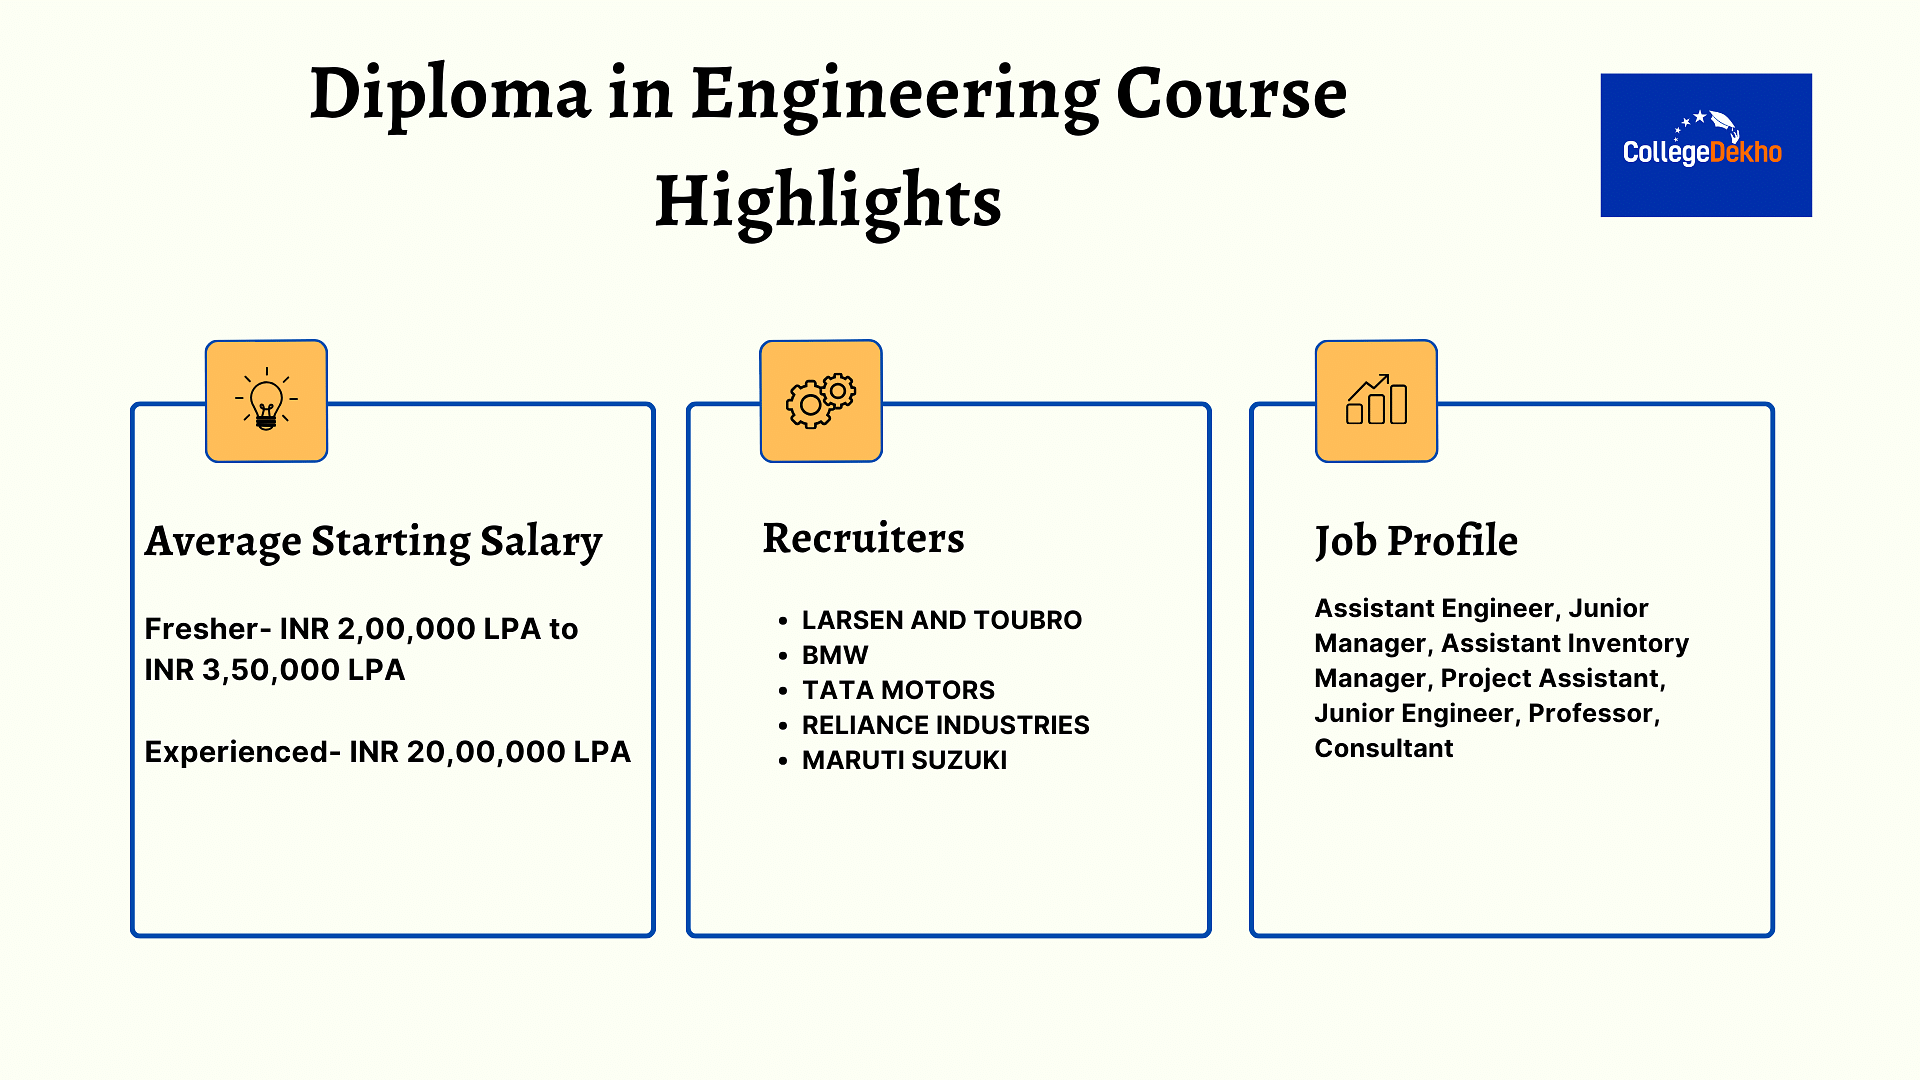 Diploma in Engineering Course Highlights